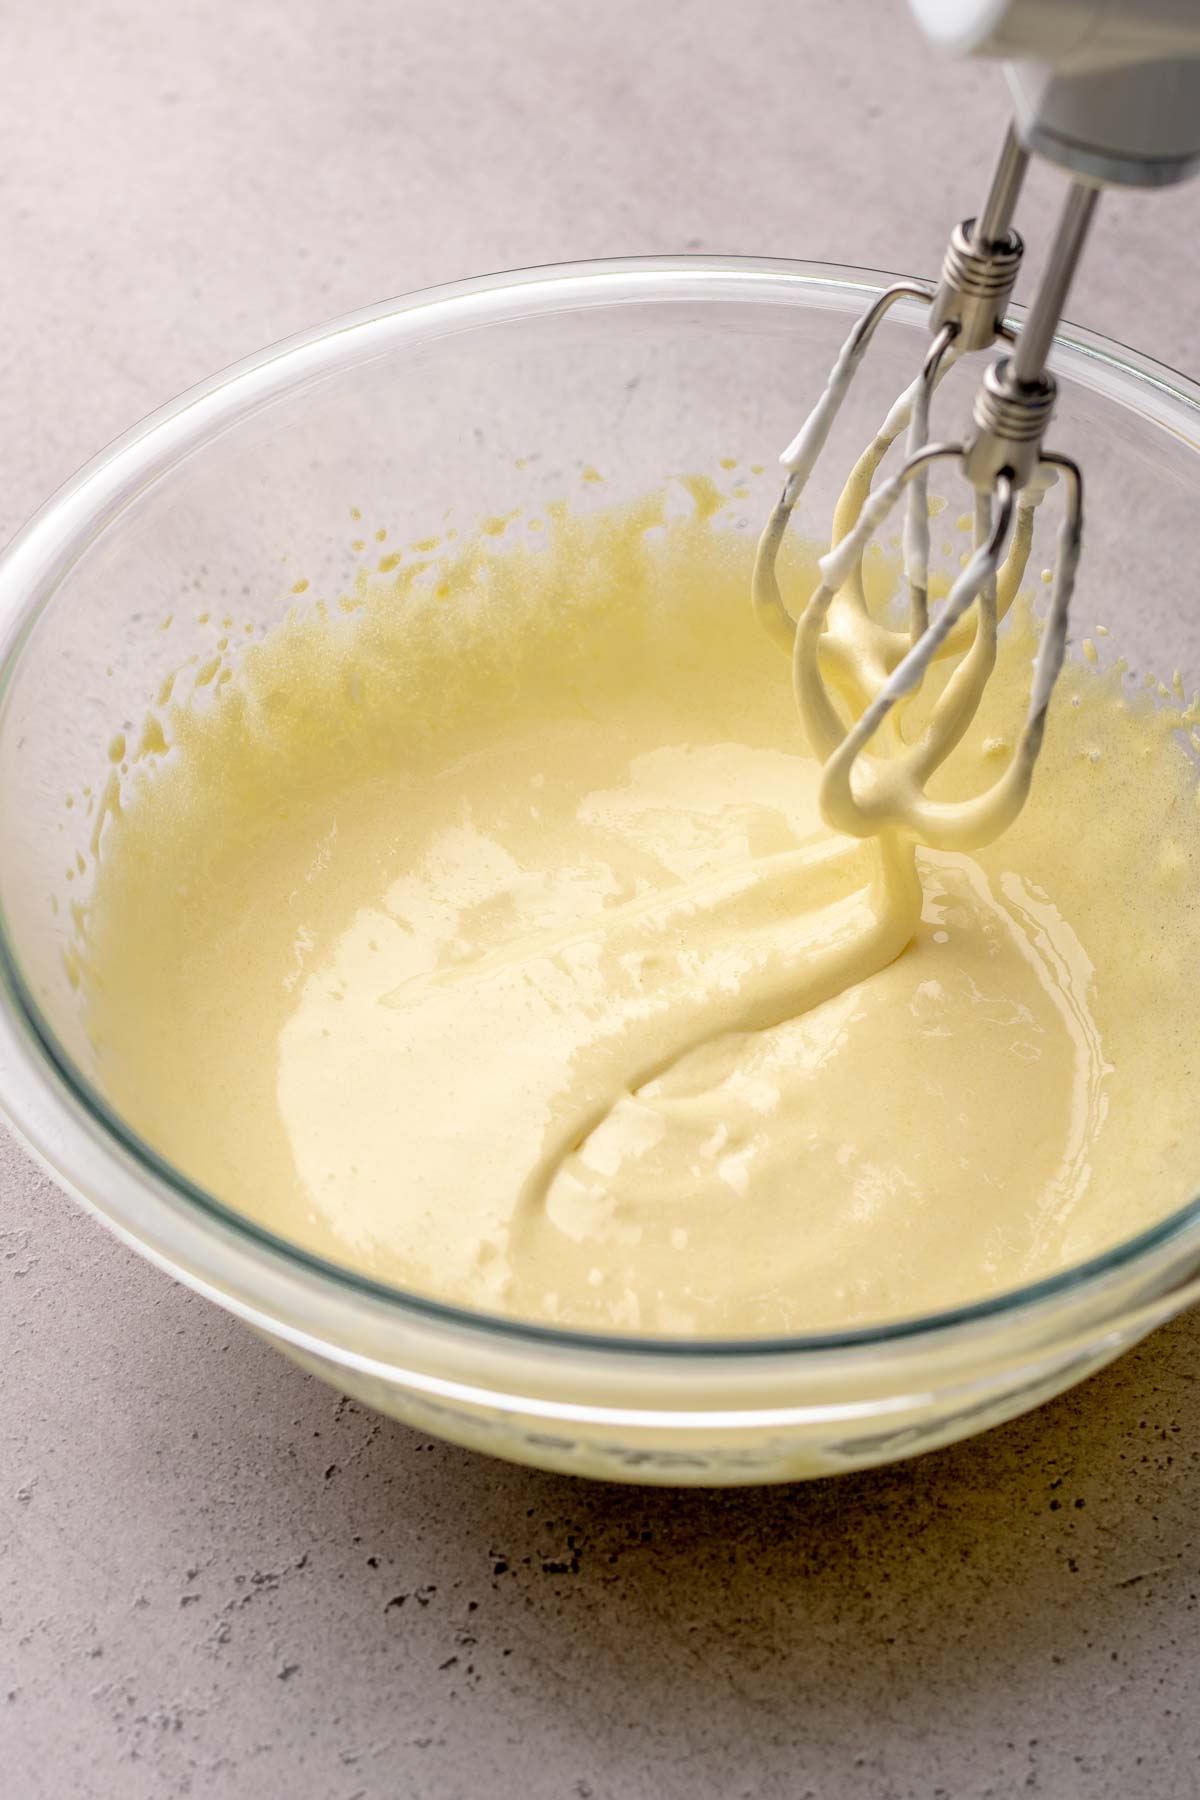 Sponge cake batter falling off of beaters into a bowl.